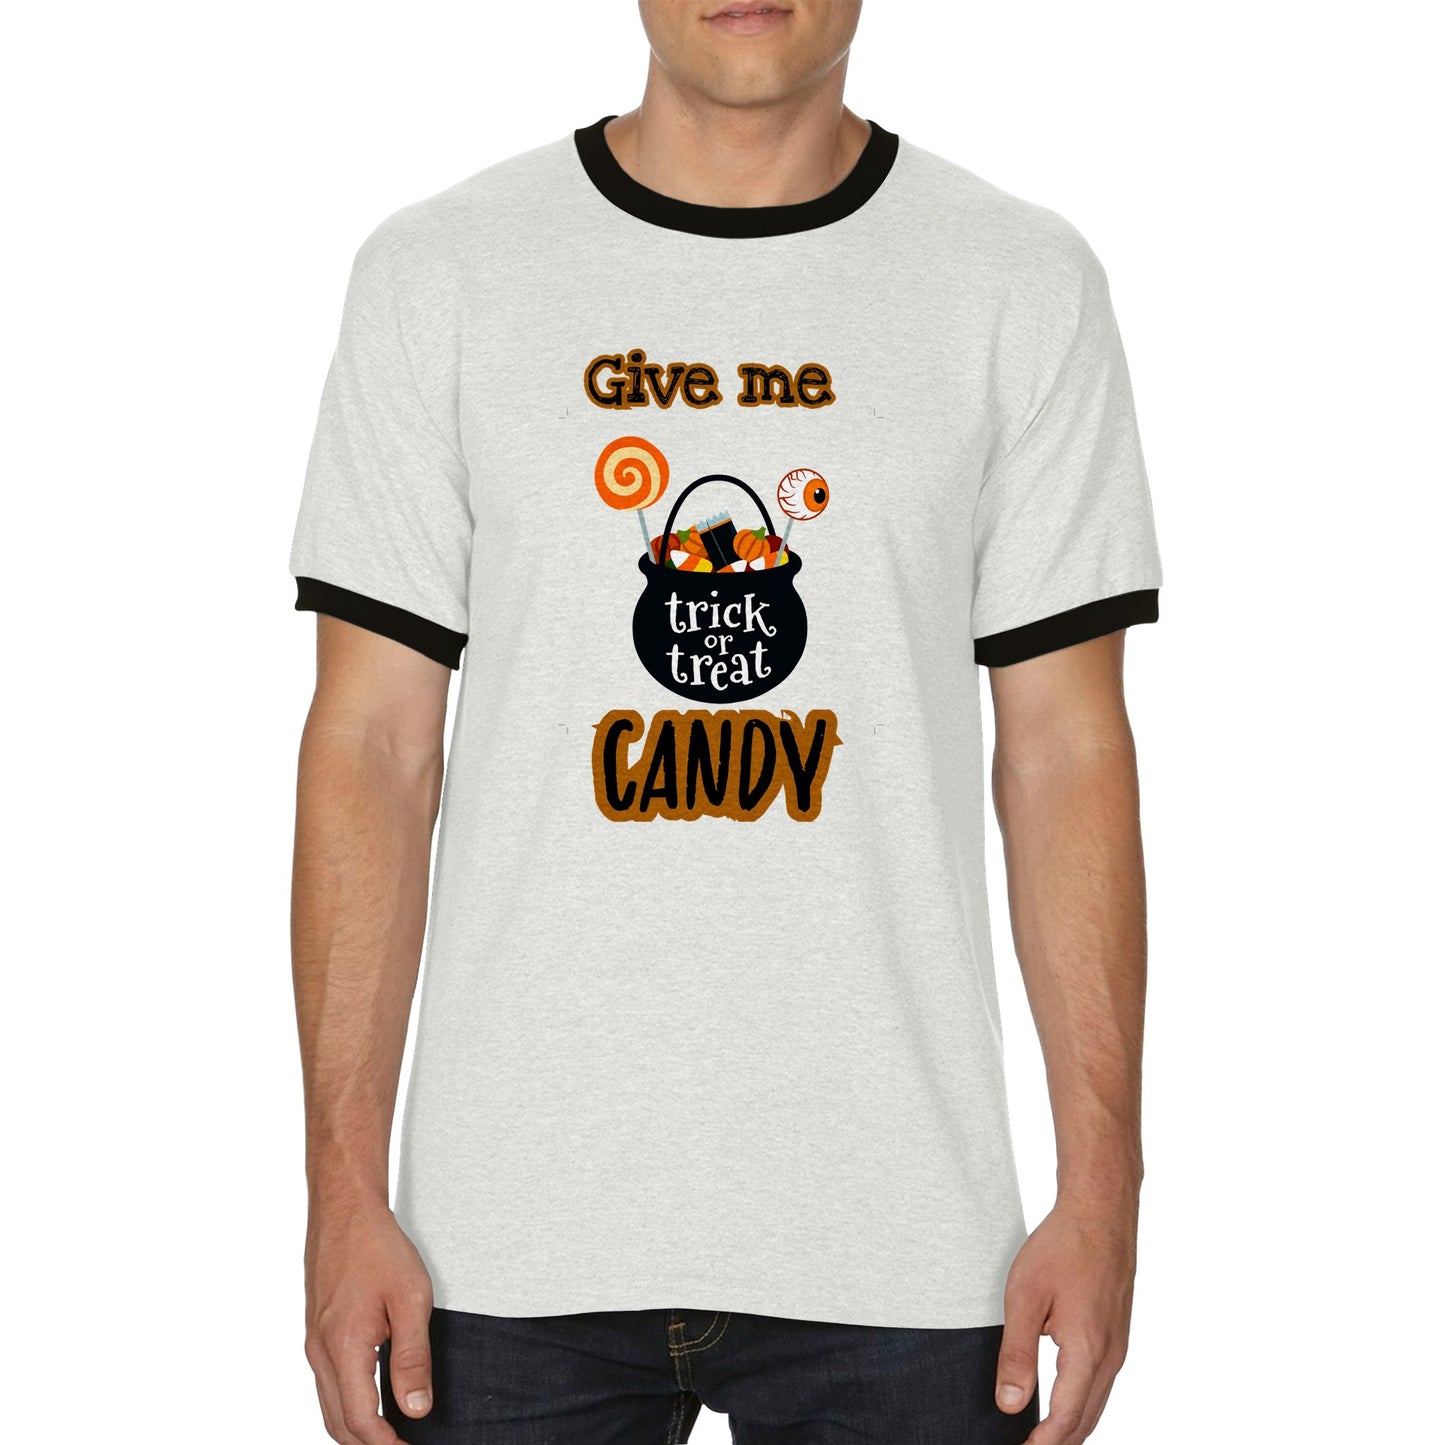 Give me candy  - Unisex Ringer T-shirt